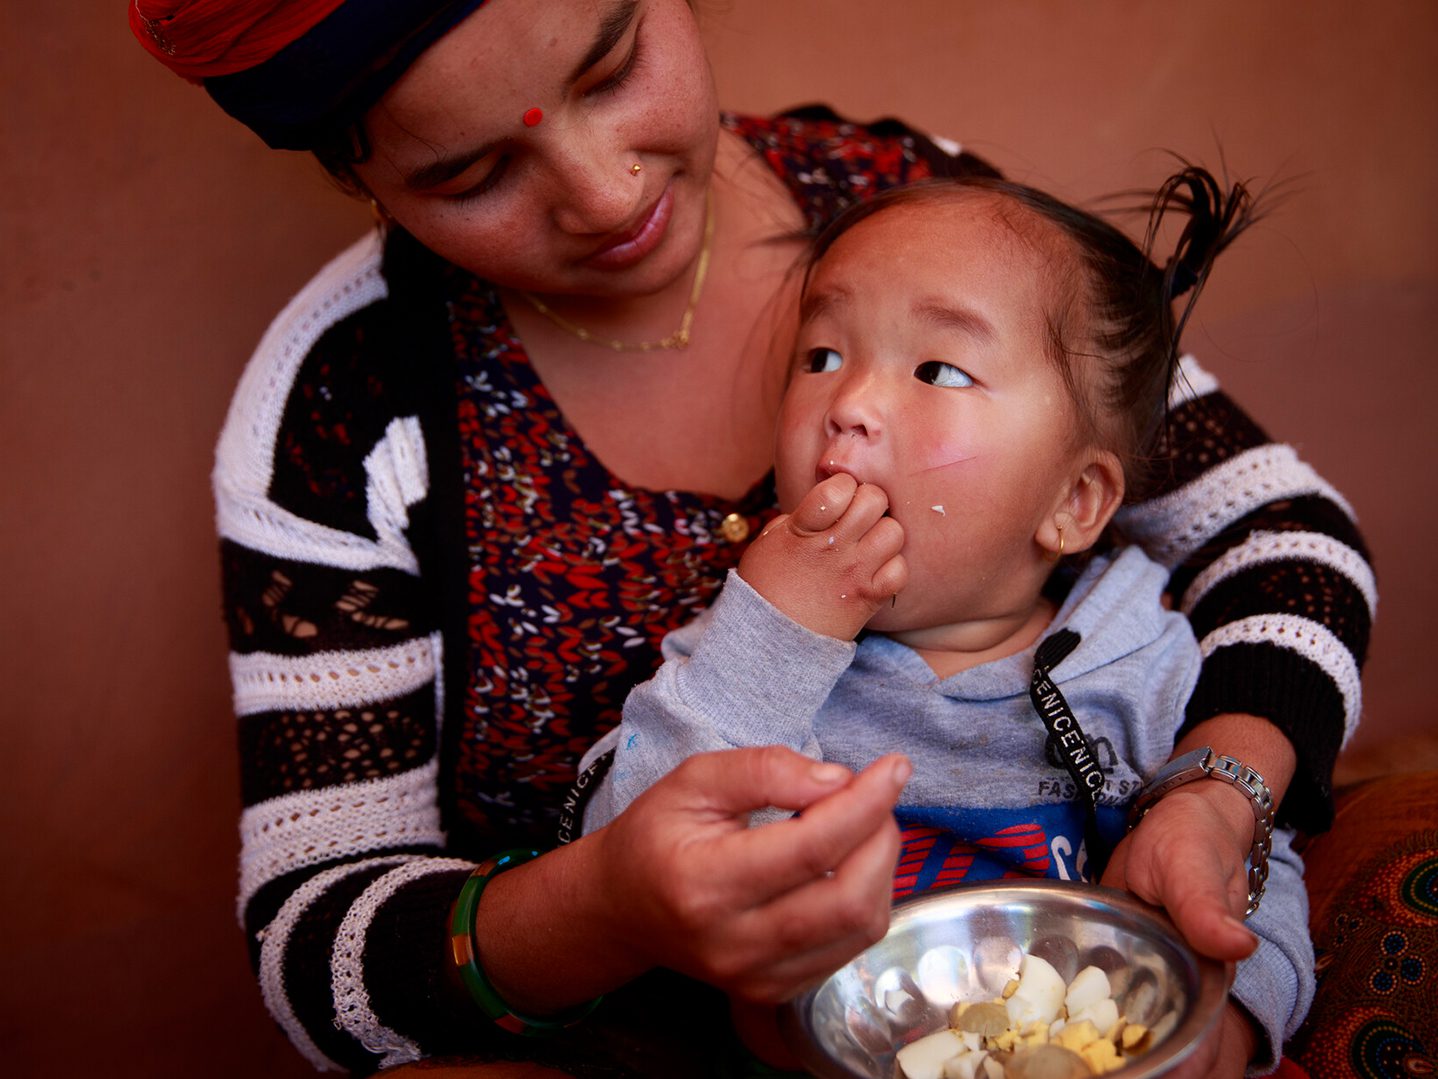 Therapeutic foods fortified with essential nutrients so children can grow strong.